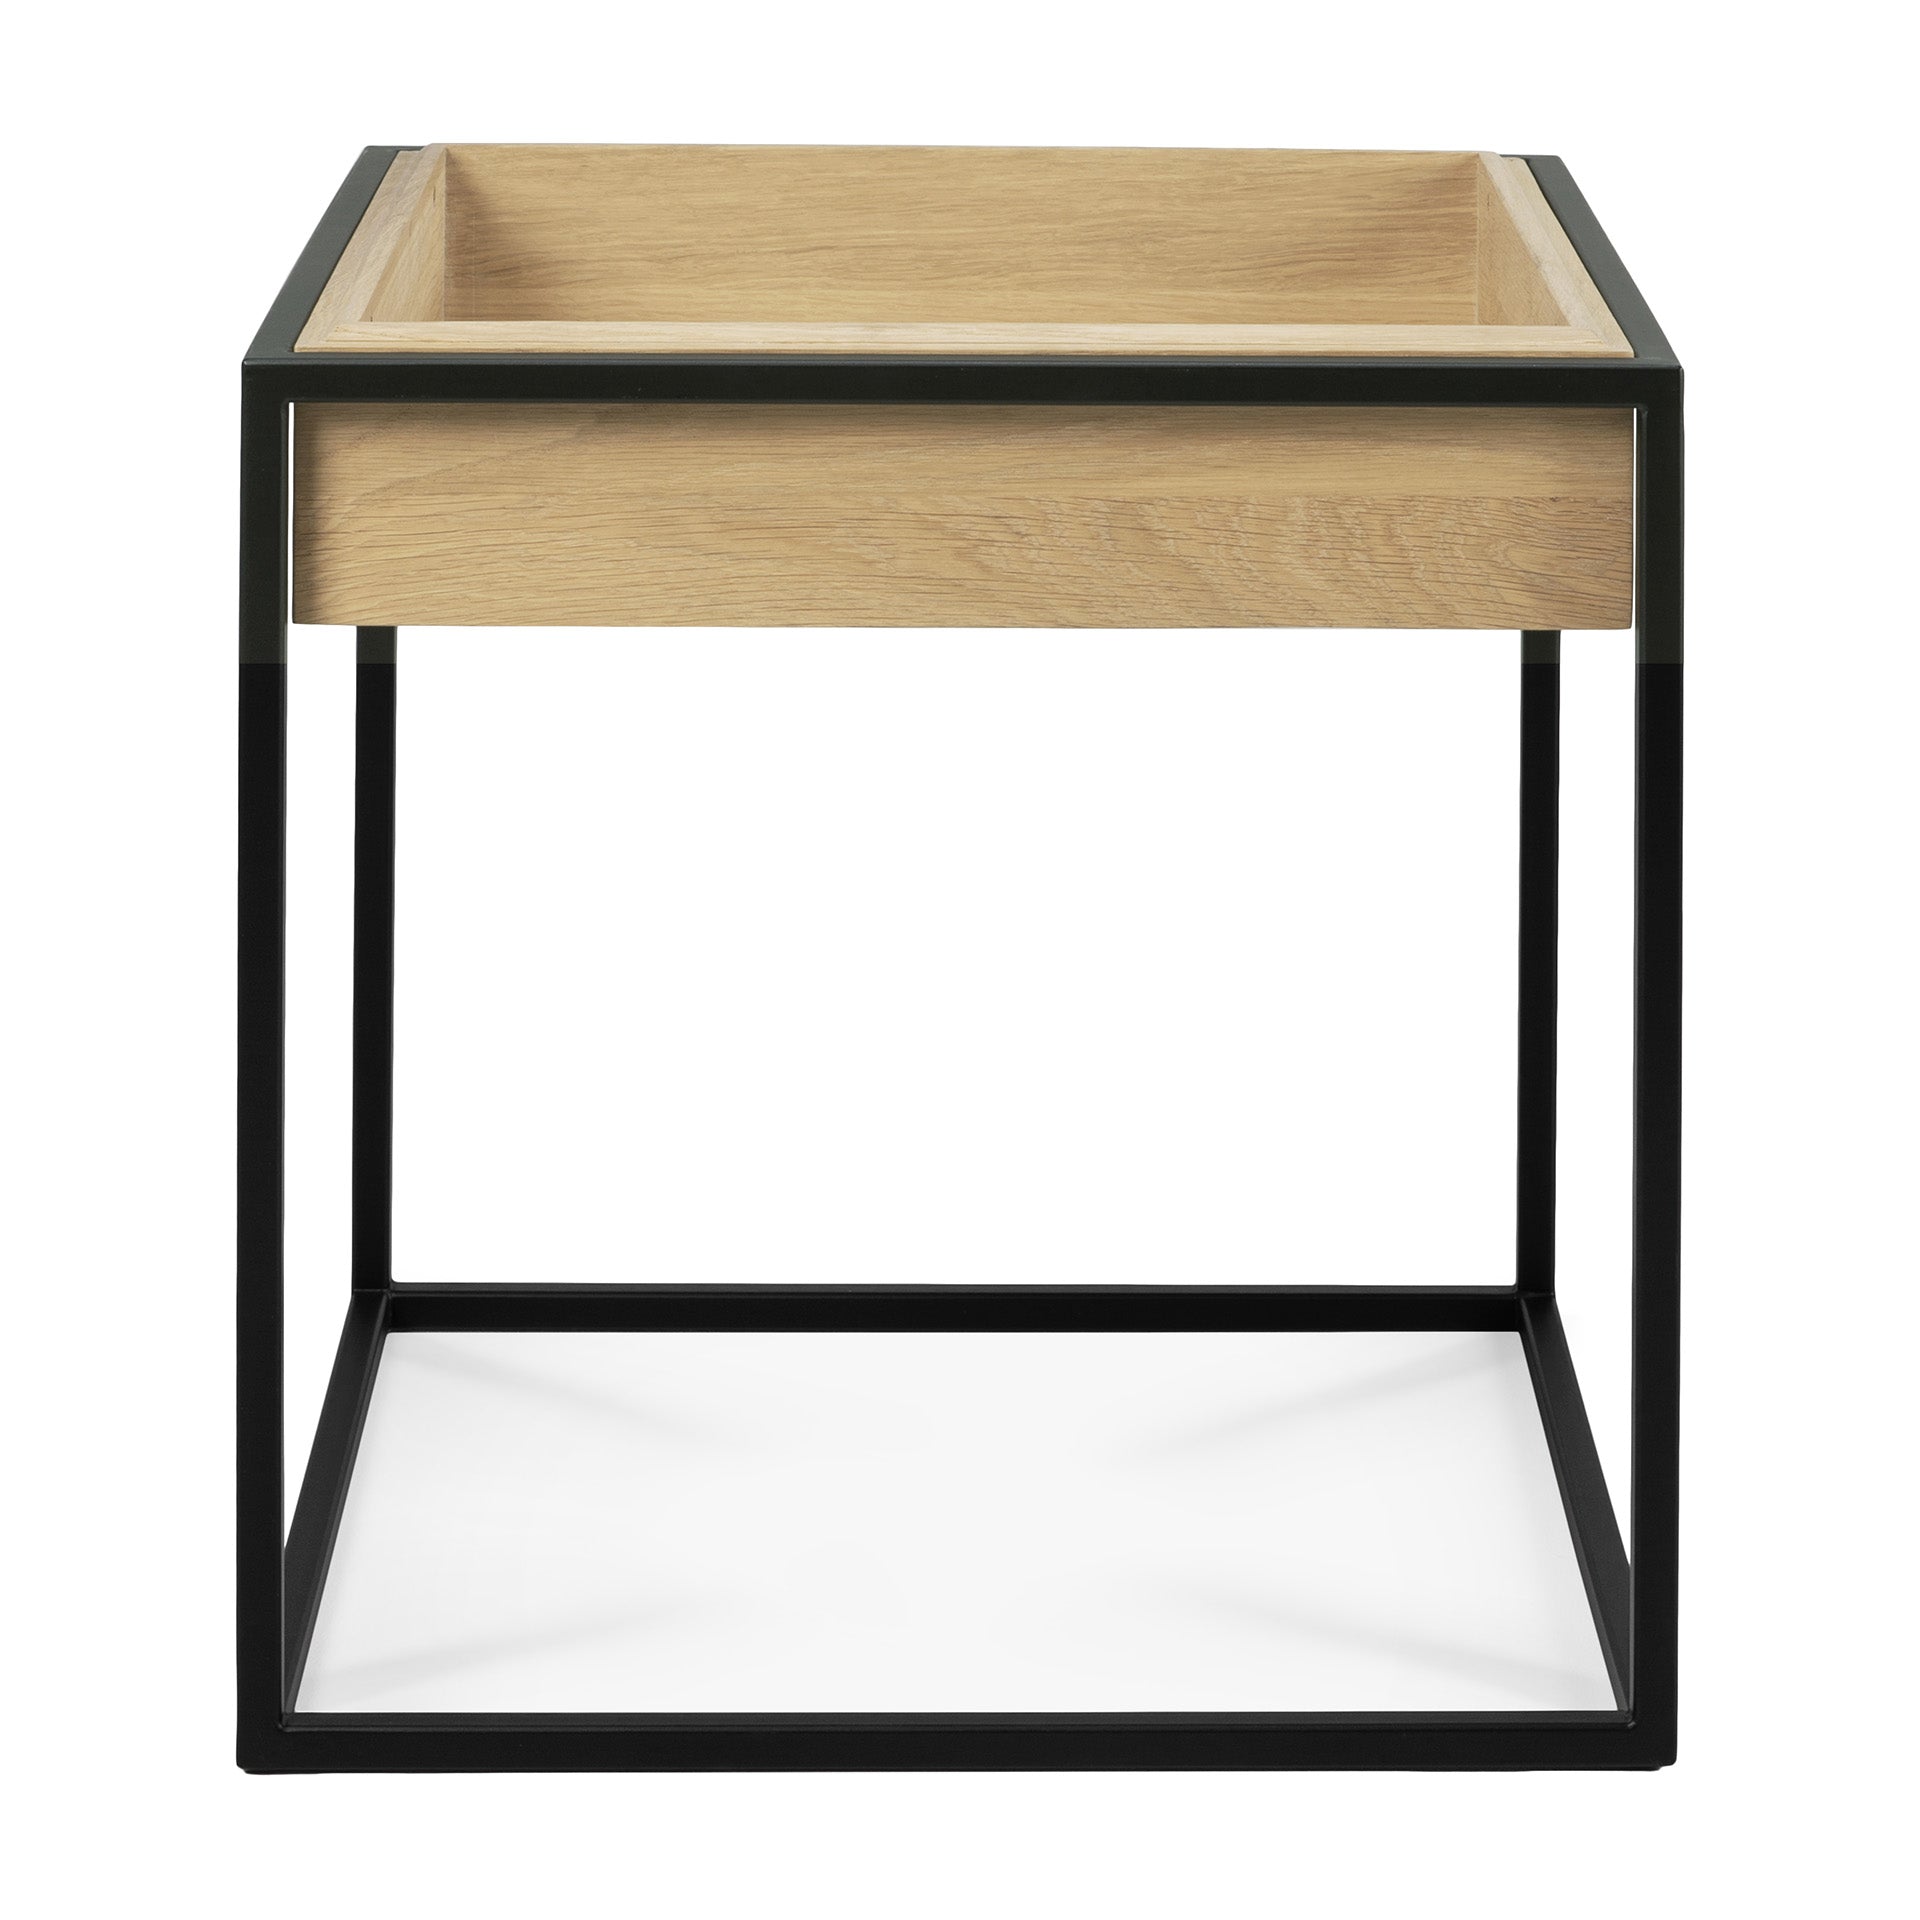 Ethnicraft Oak Monolit Side Table available from Make Your House A Home, Bendigo, Victoria, Australia